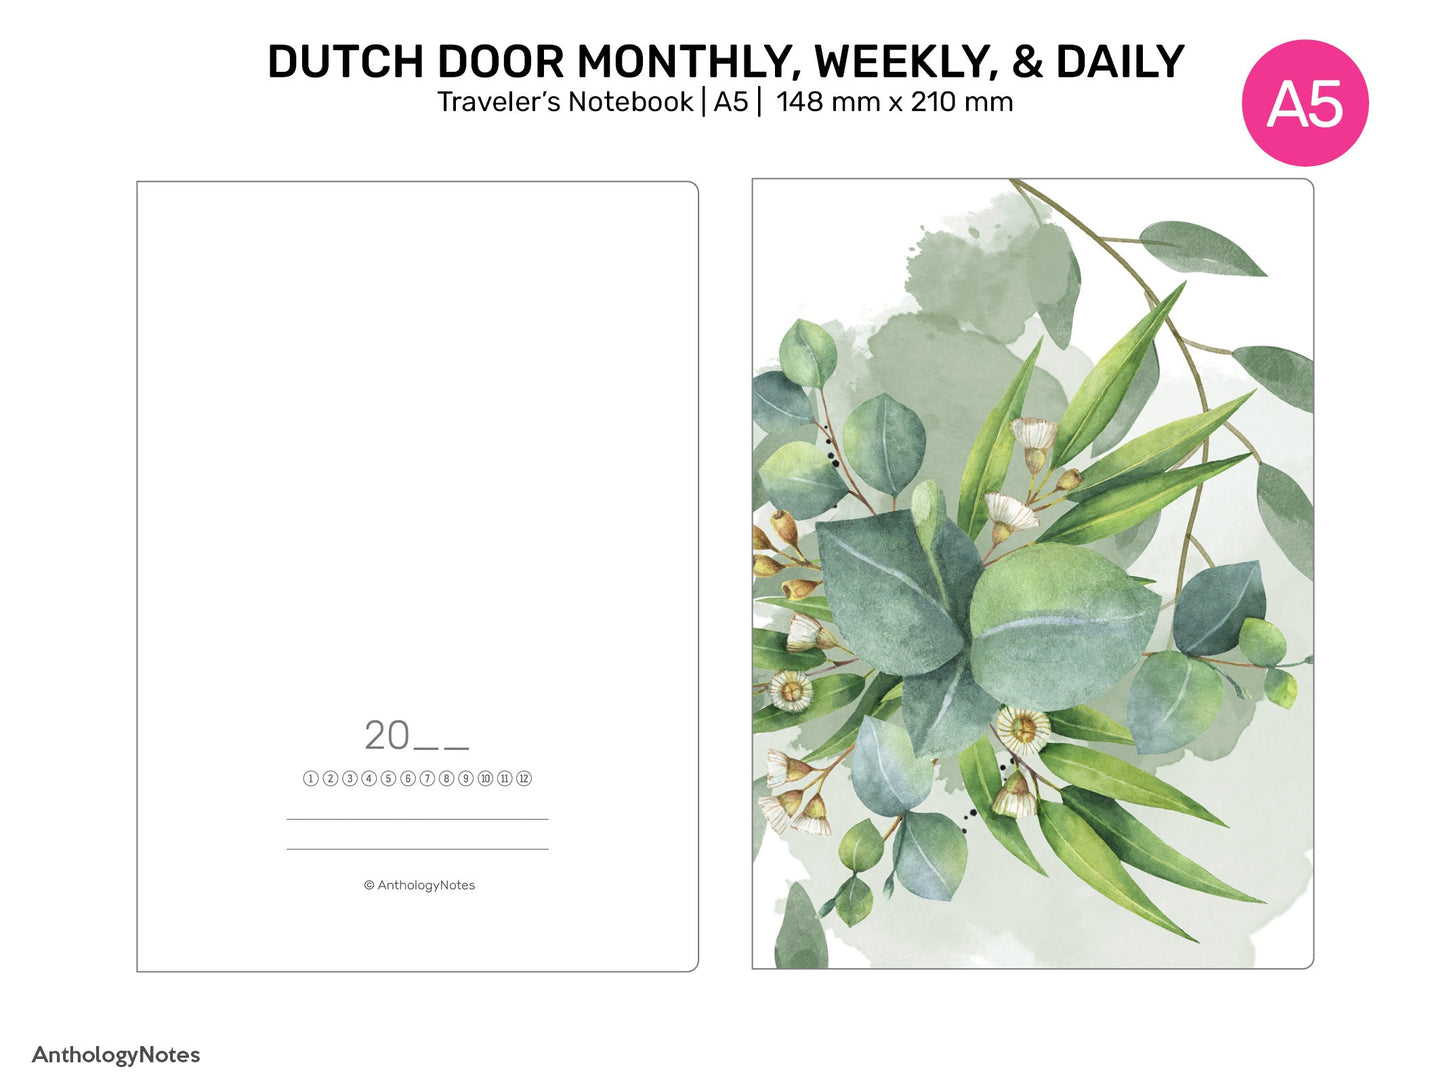 A5 TN Dutch Door Style Traveler's Notebook Printable Insert Daily, Weekly, Monthly Grid Minimalist DD-A5001